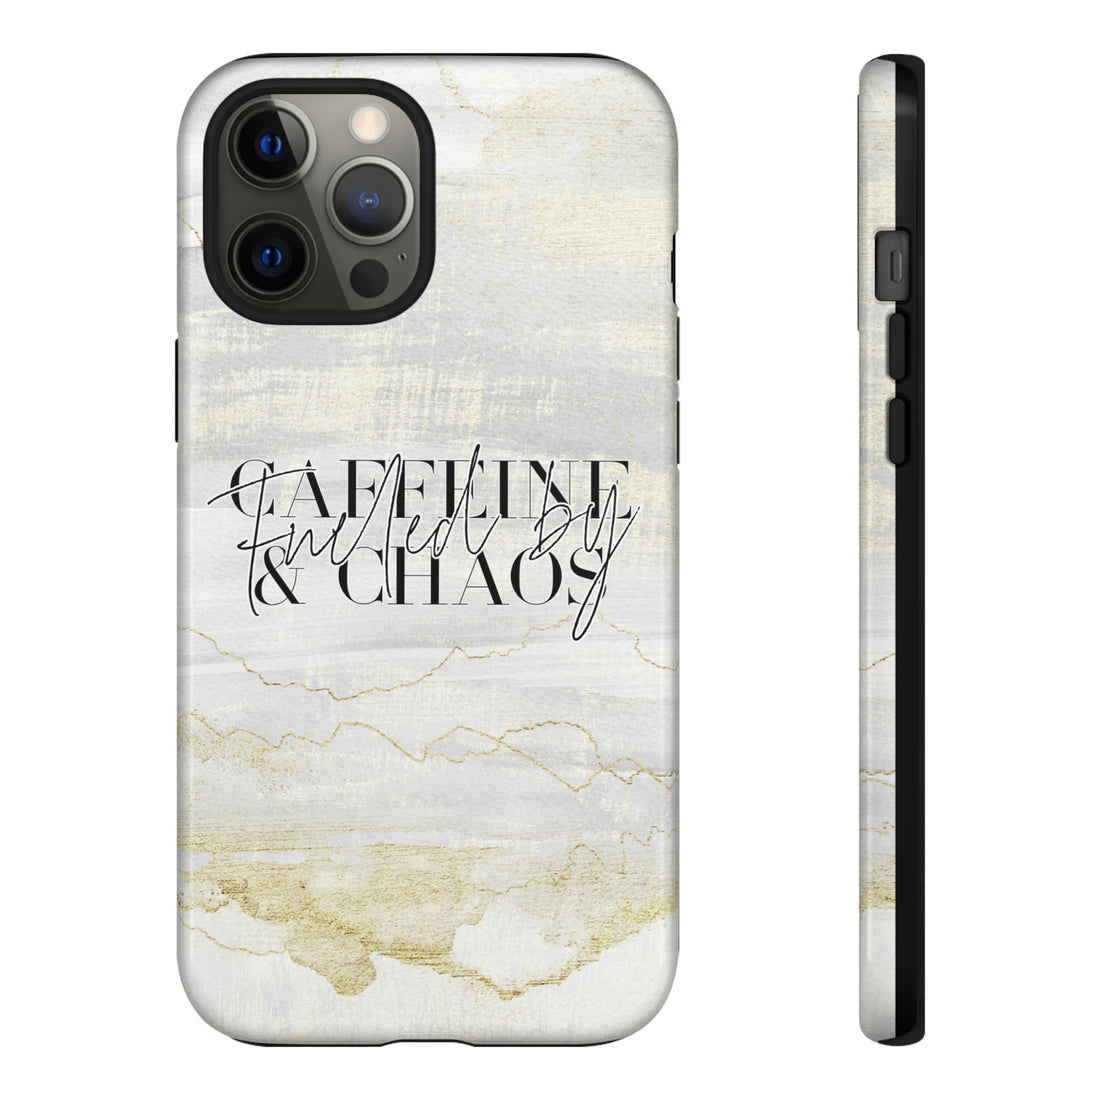 Fueled by Caffeine & Chaos Tough Case